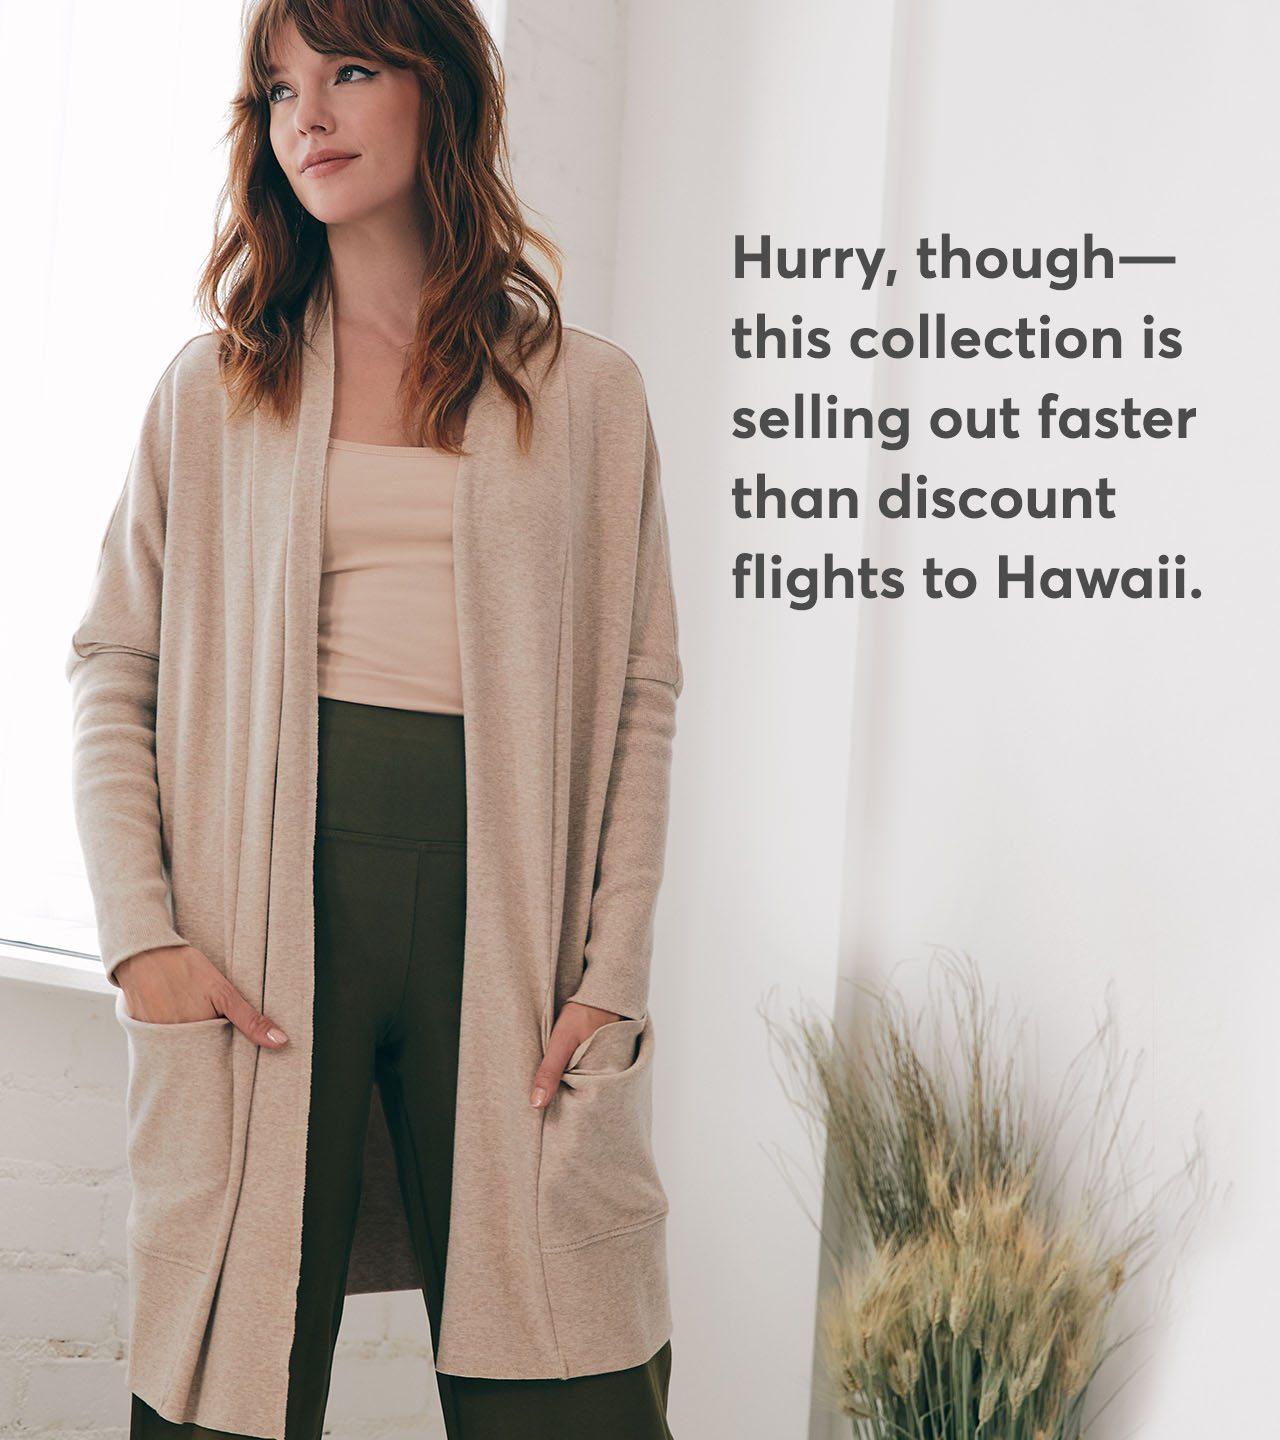 Hurry though—this collection is selling out faster than discount flights to Hawaii.